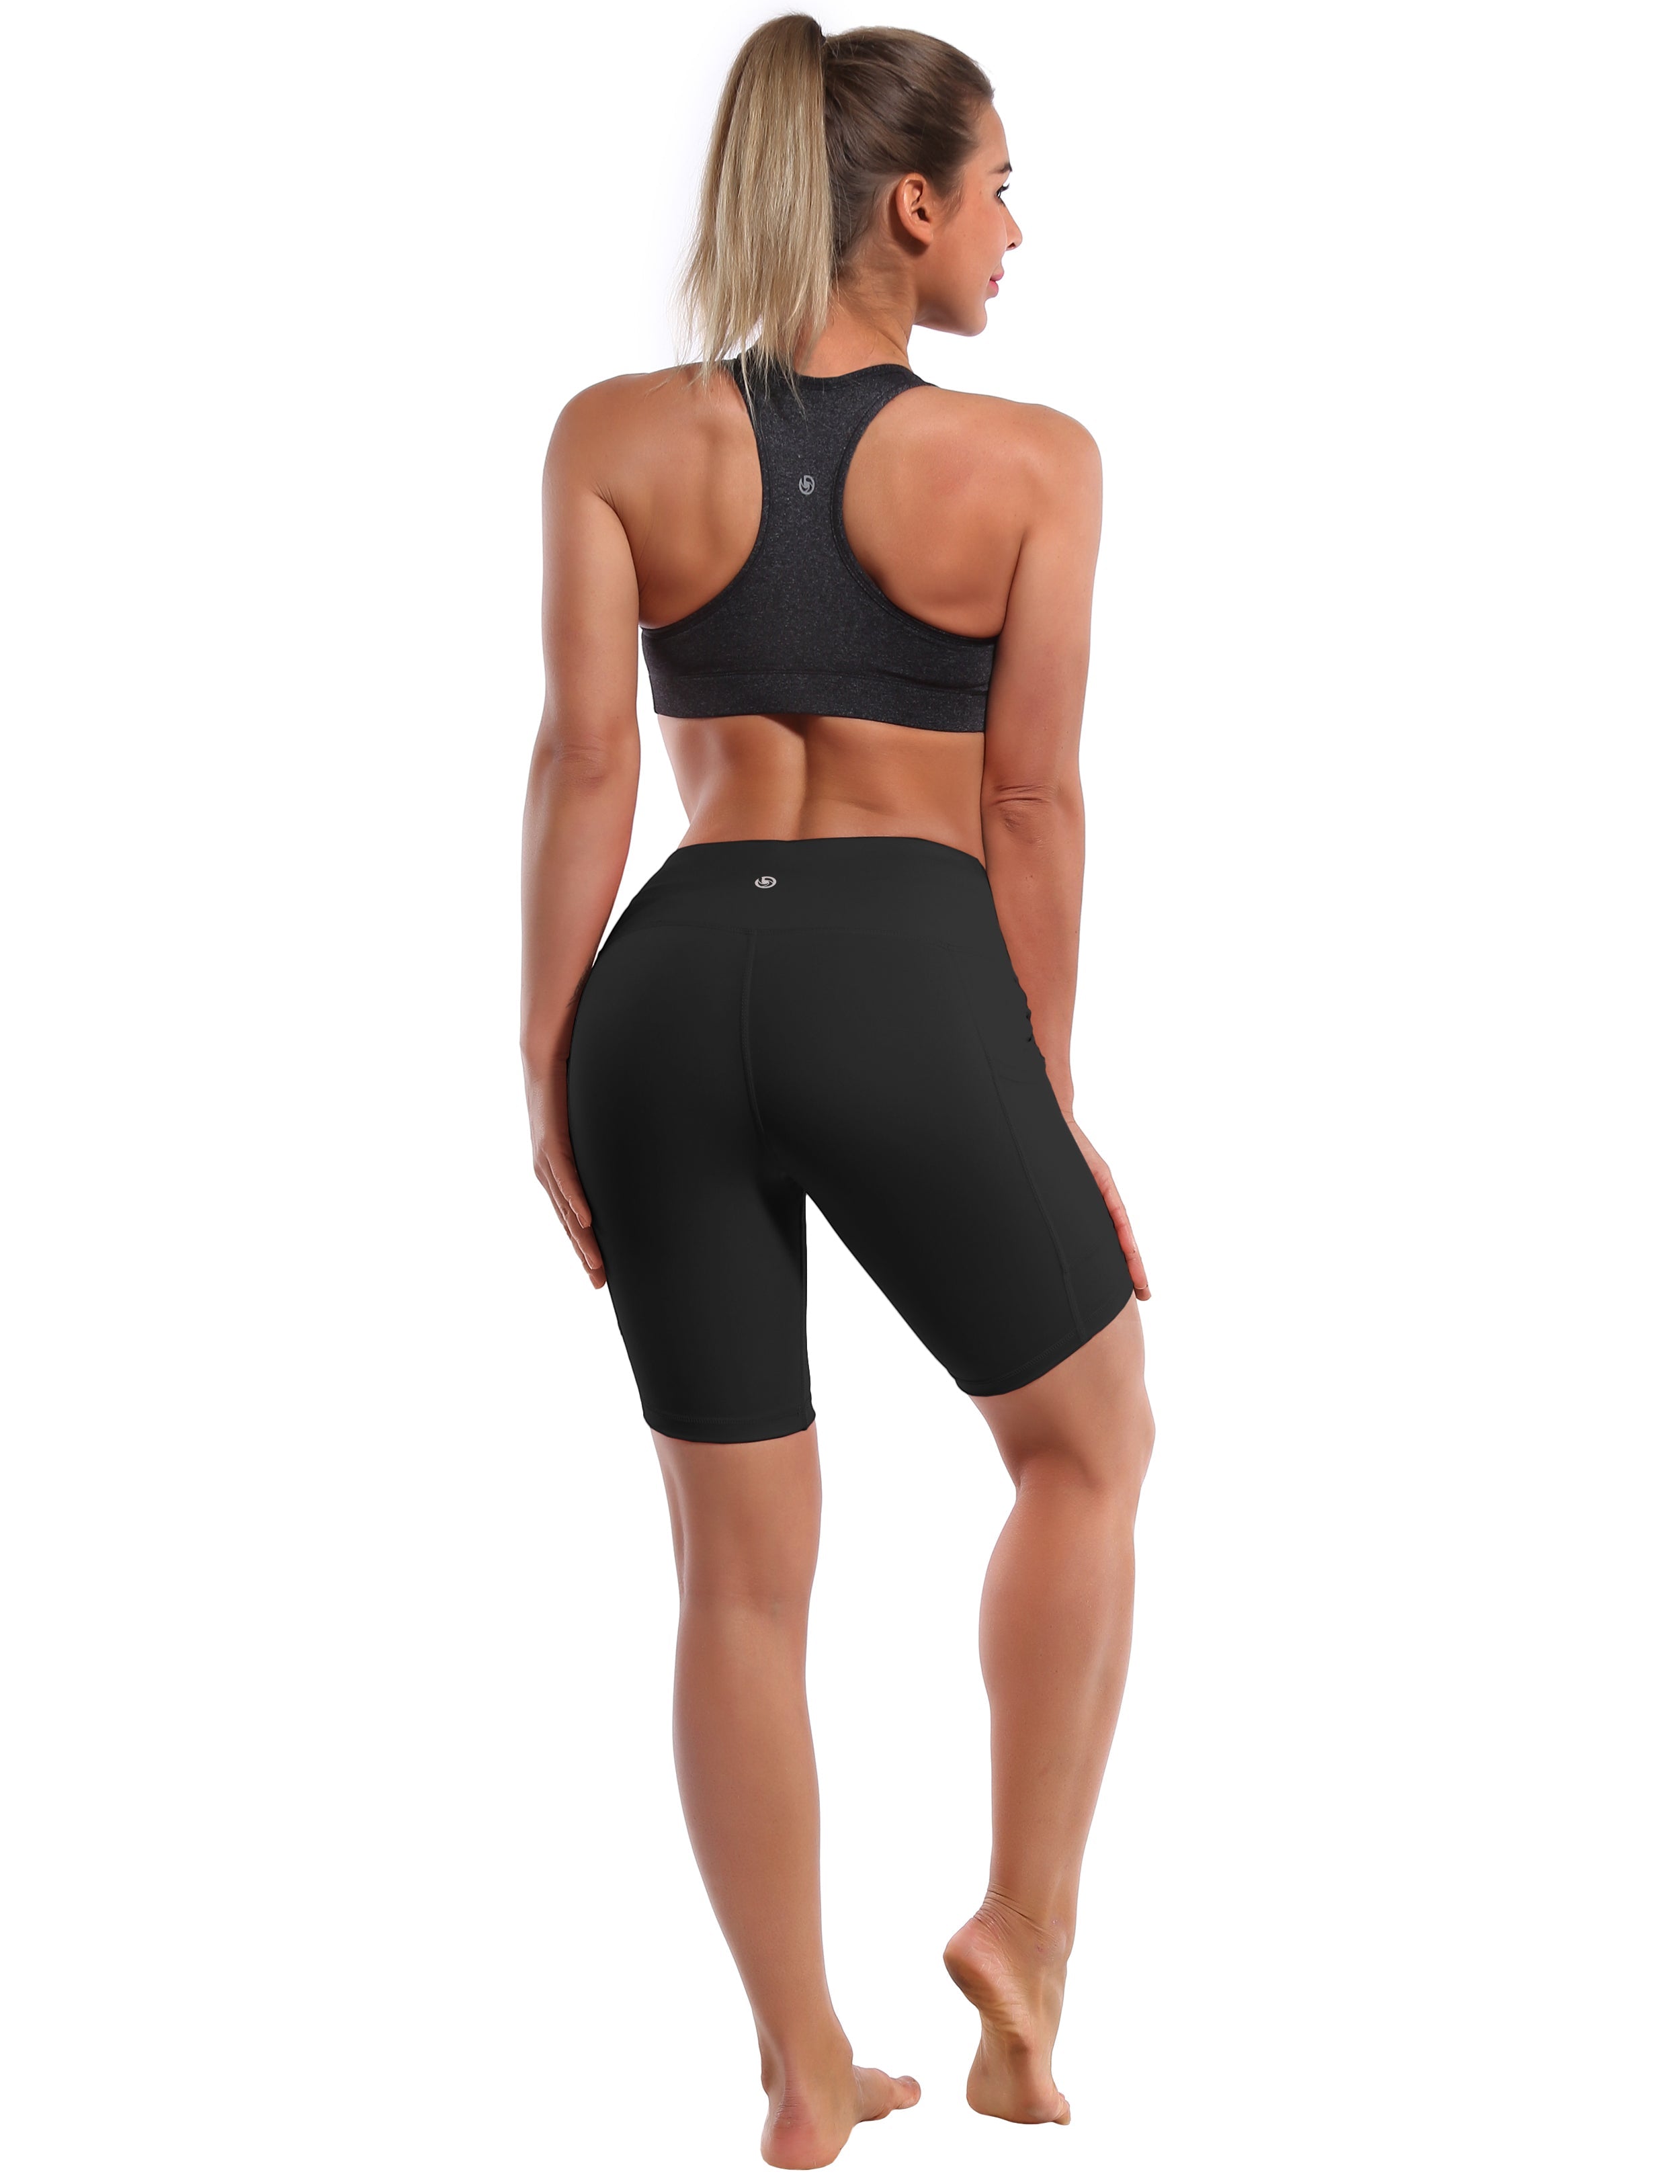 8" Side Pockets Golf Shorts black Sleek, soft, smooth and totally comfortable: our newest style is here. Softest-ever fabric High elasticity High density 4-way stretch Fabric doesn't attract lint easily No see-through Moisture-wicking Machine wash 75% Nylon, 25% Spandex